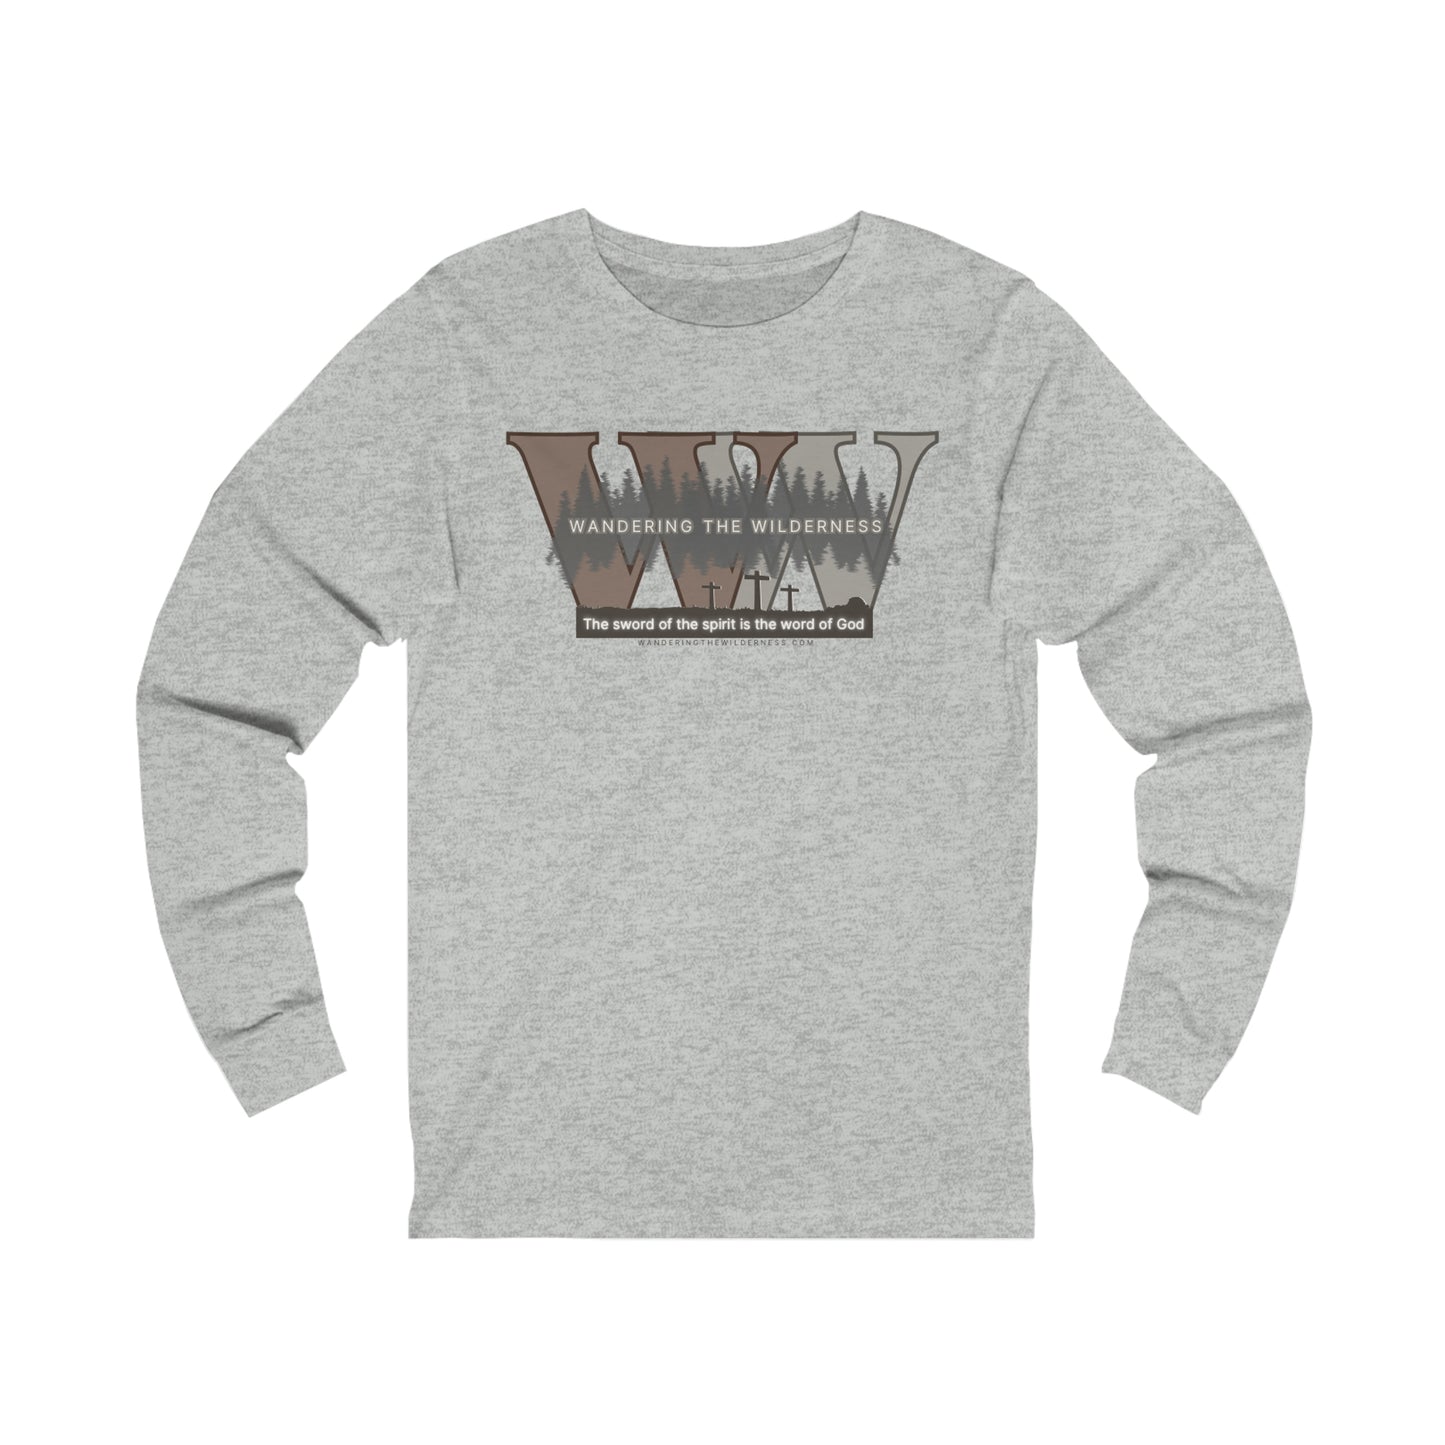 Wandering the Wilderness long sleeve T-shirt big logo on front.